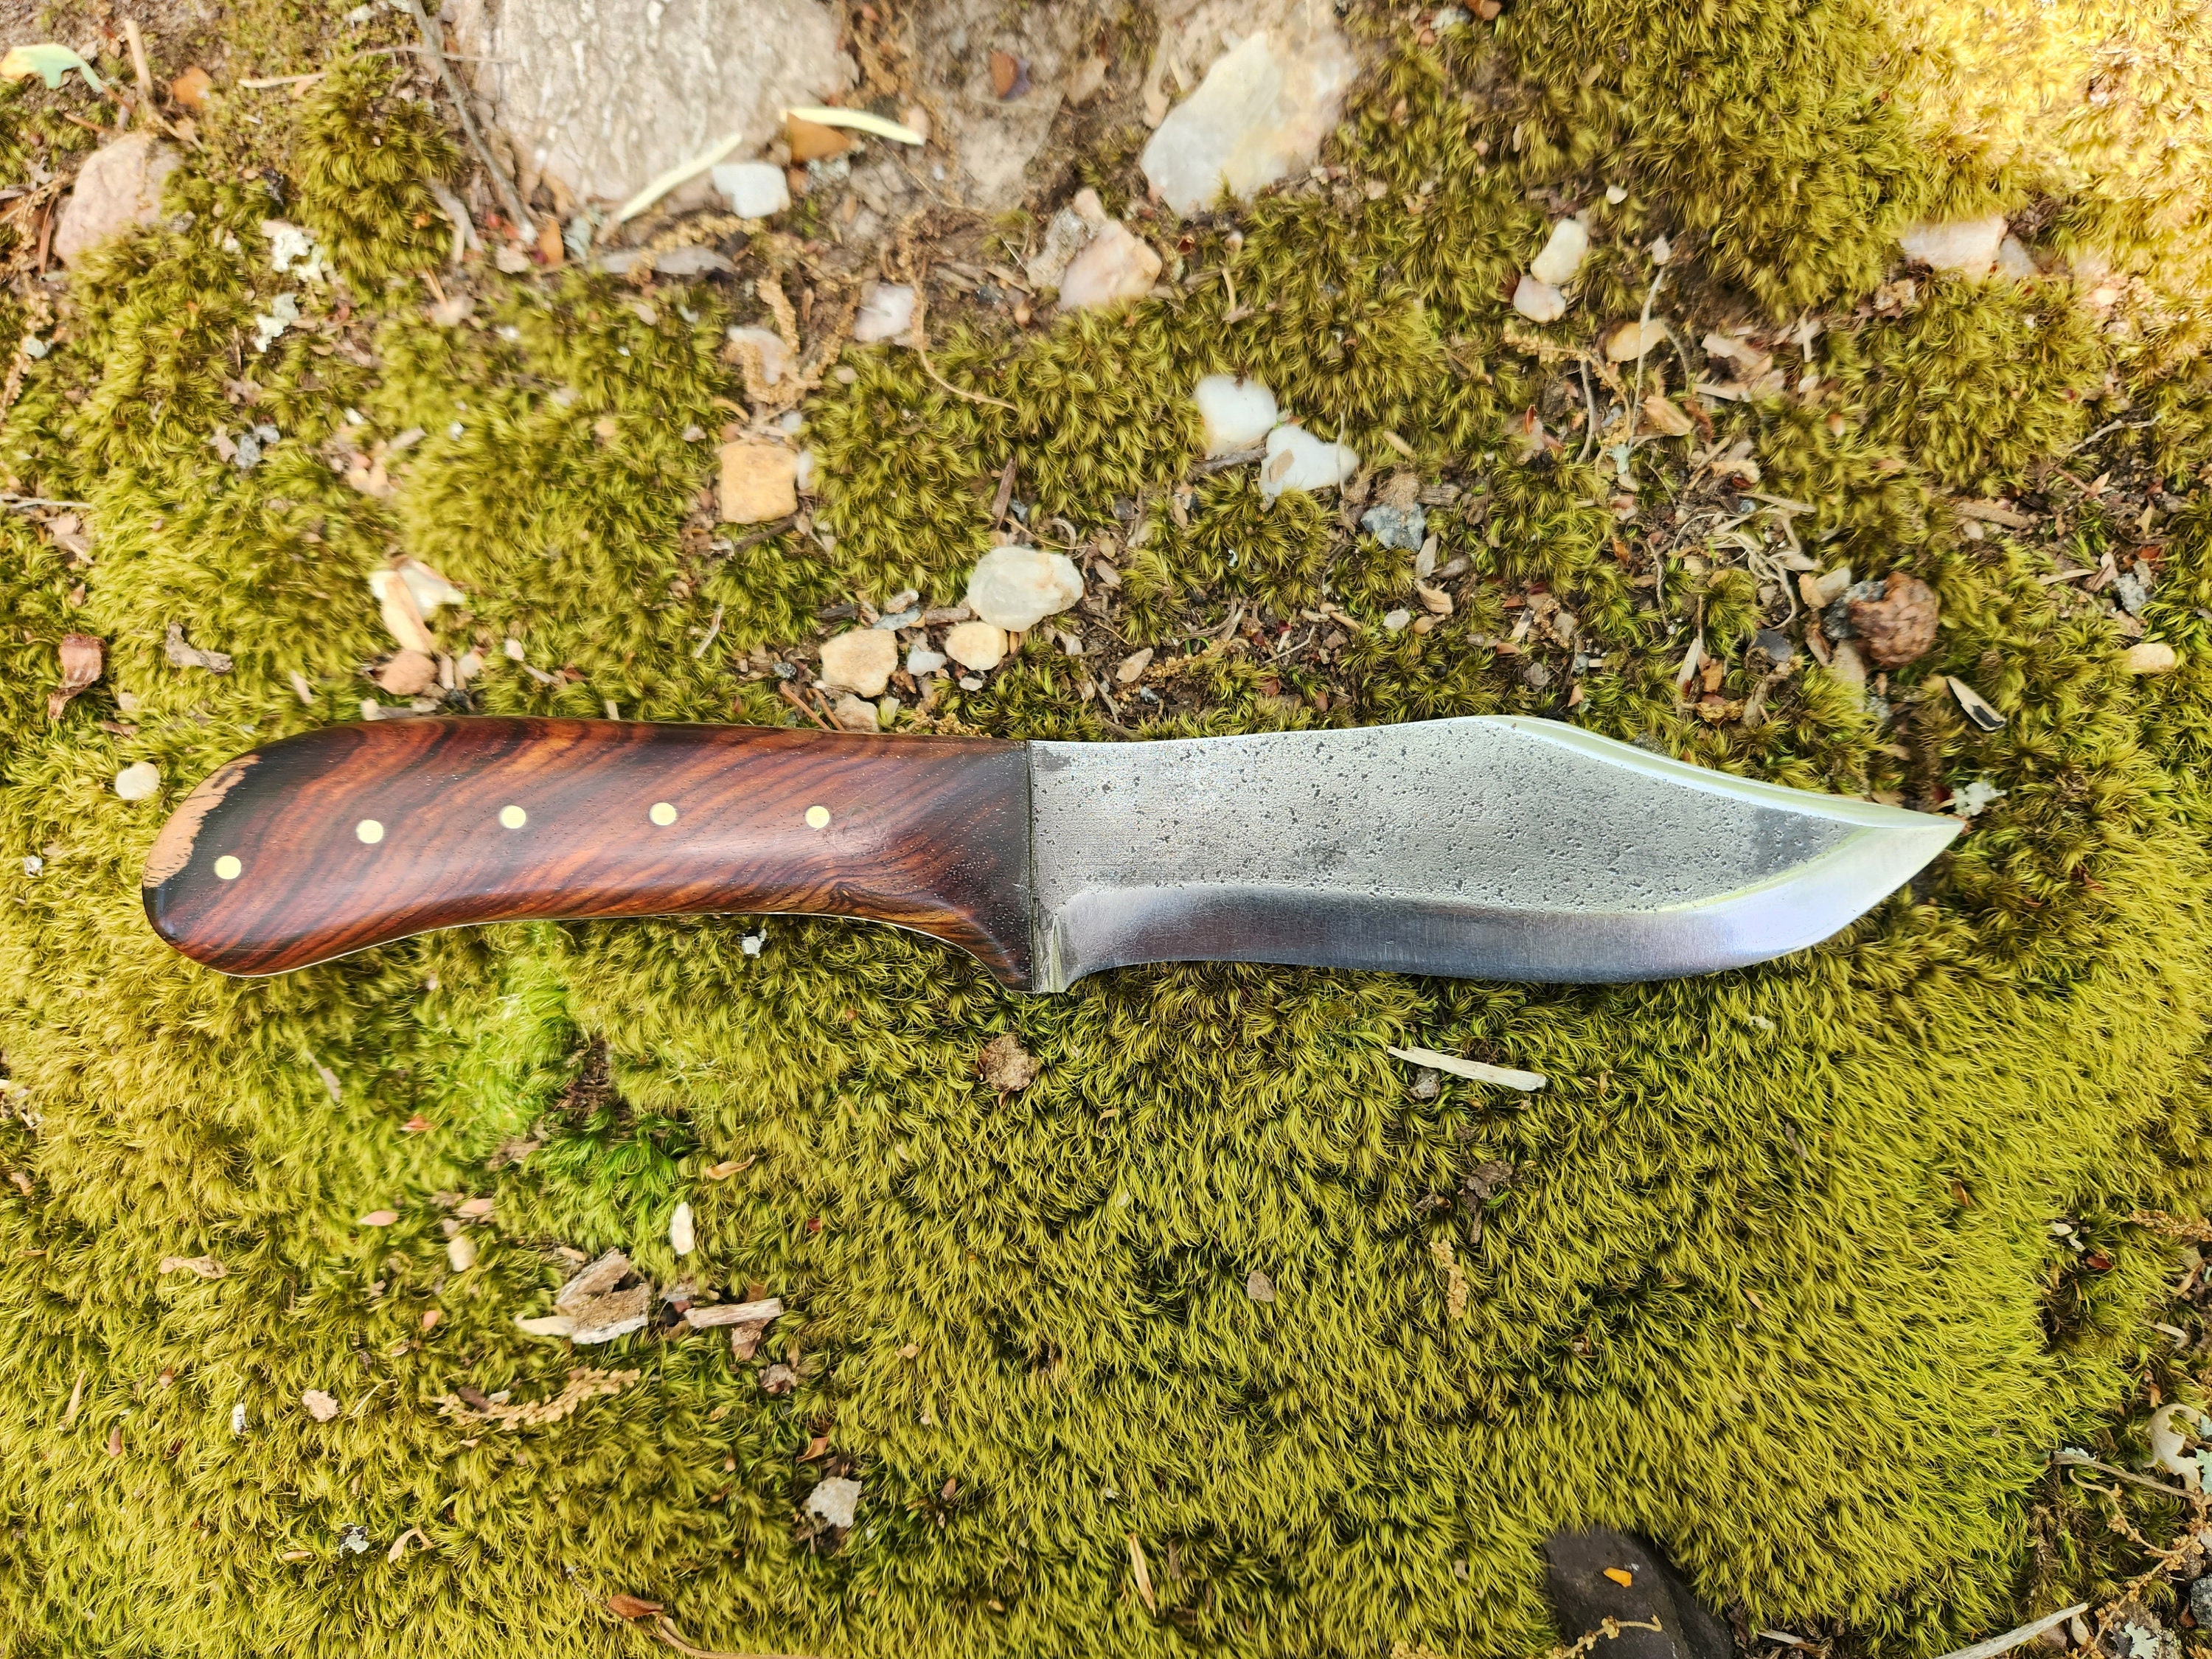 Mountain Man, Butcher Knife, Hand Forged Custom Knife by RLS Knives 